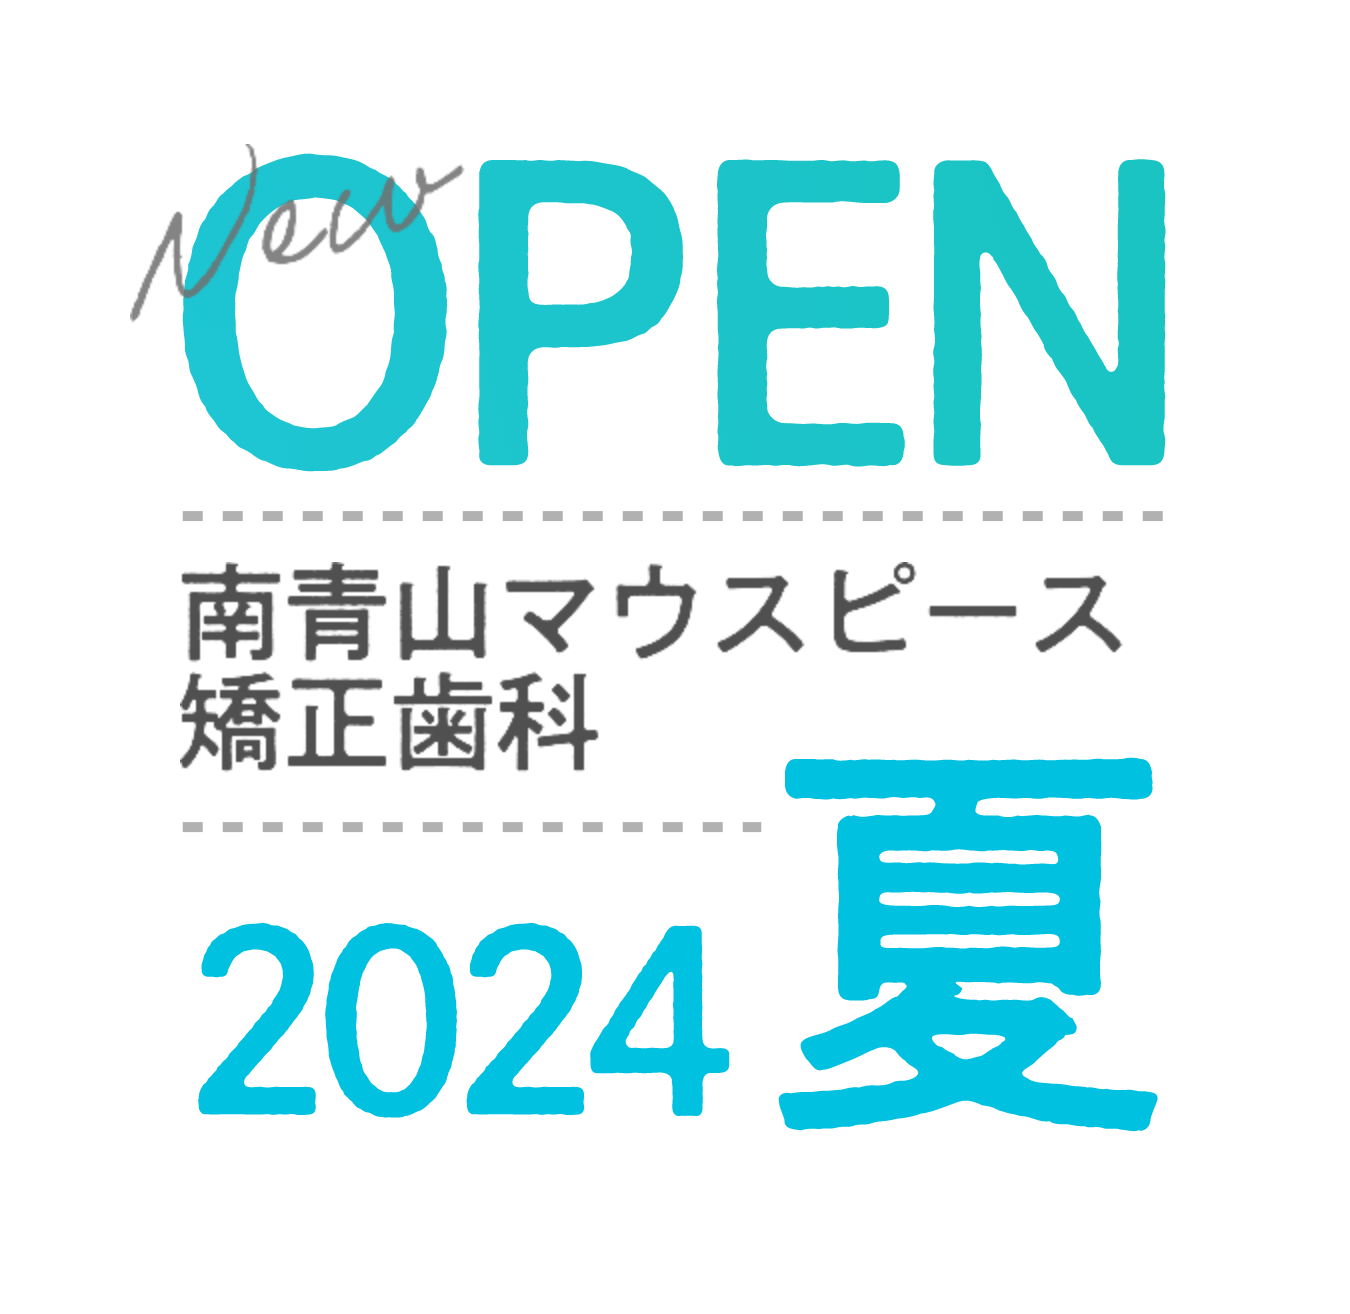 New OPEN 南青山マウスピース 矯正歯科 2024 夏